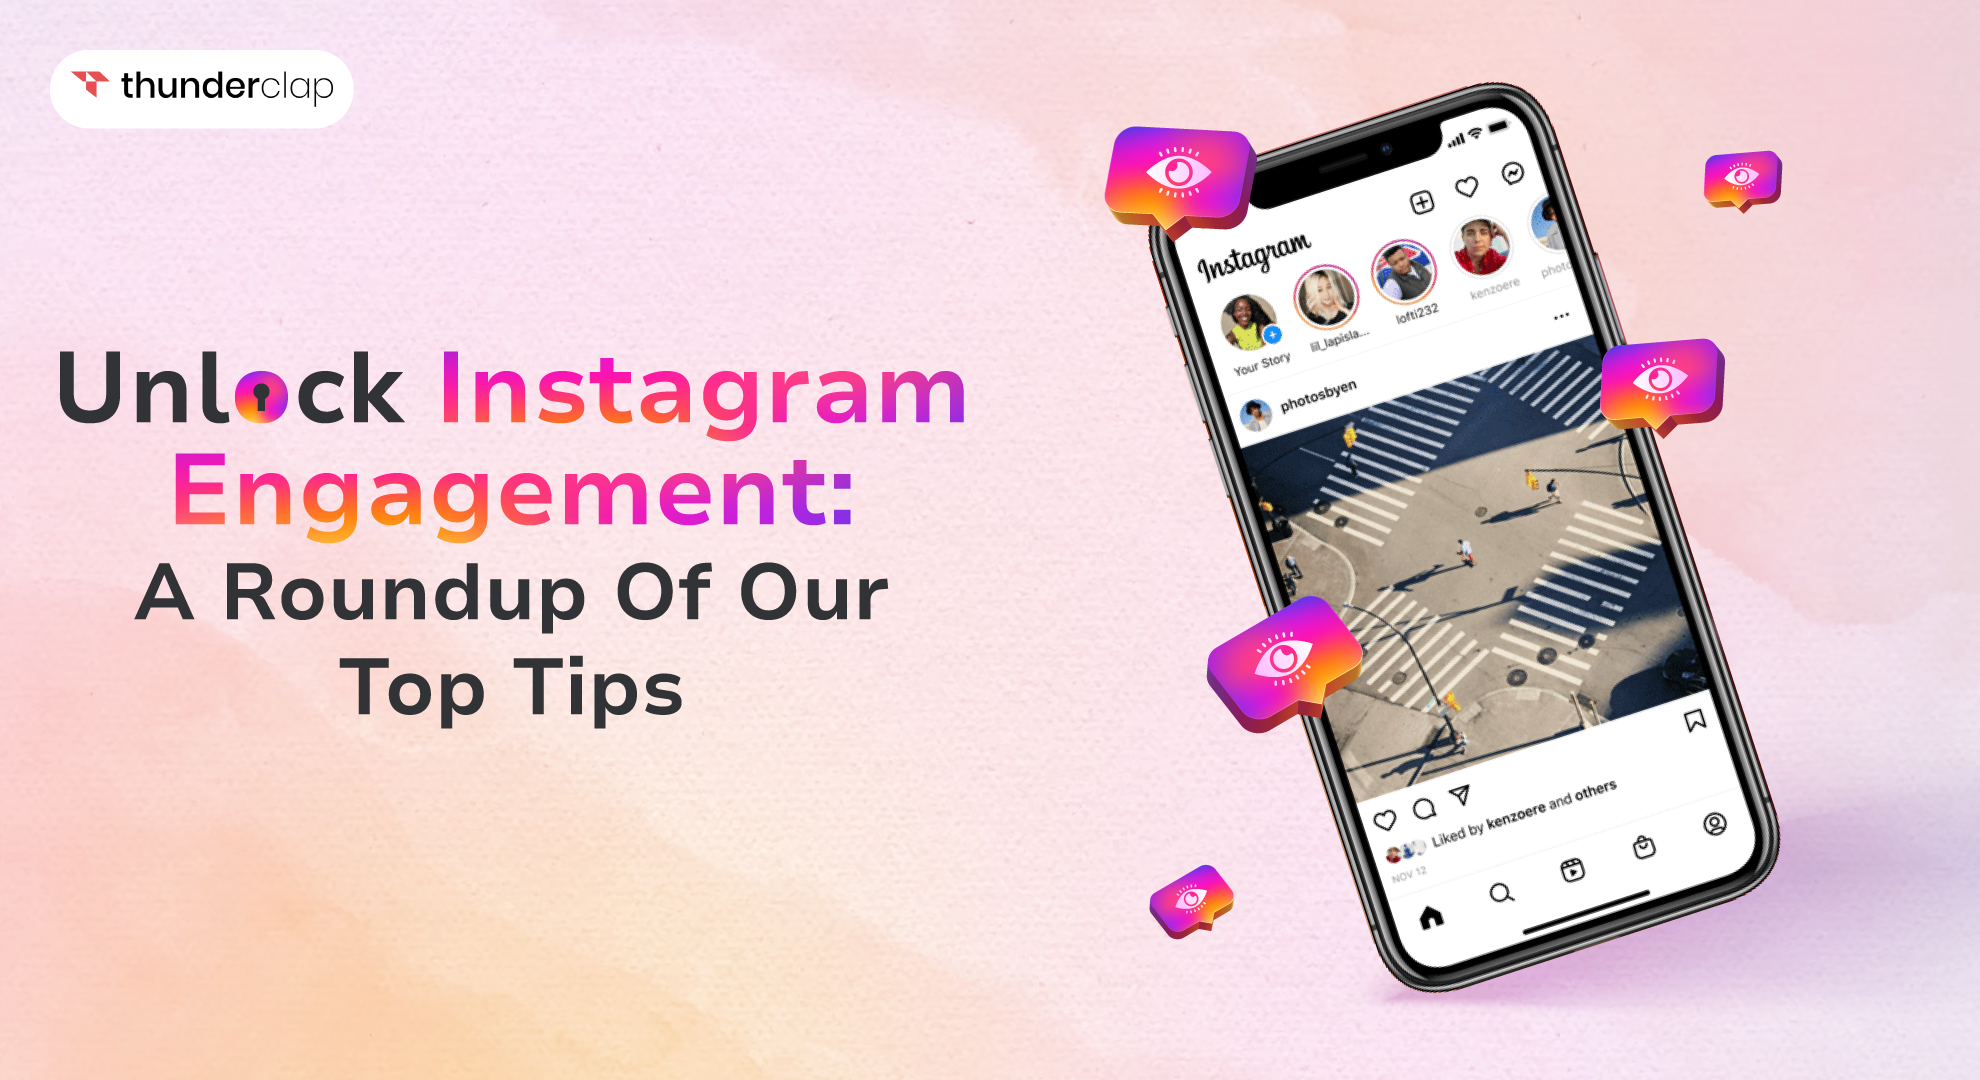 Unlock Instagram Engagement Roundup of Our Top Tips